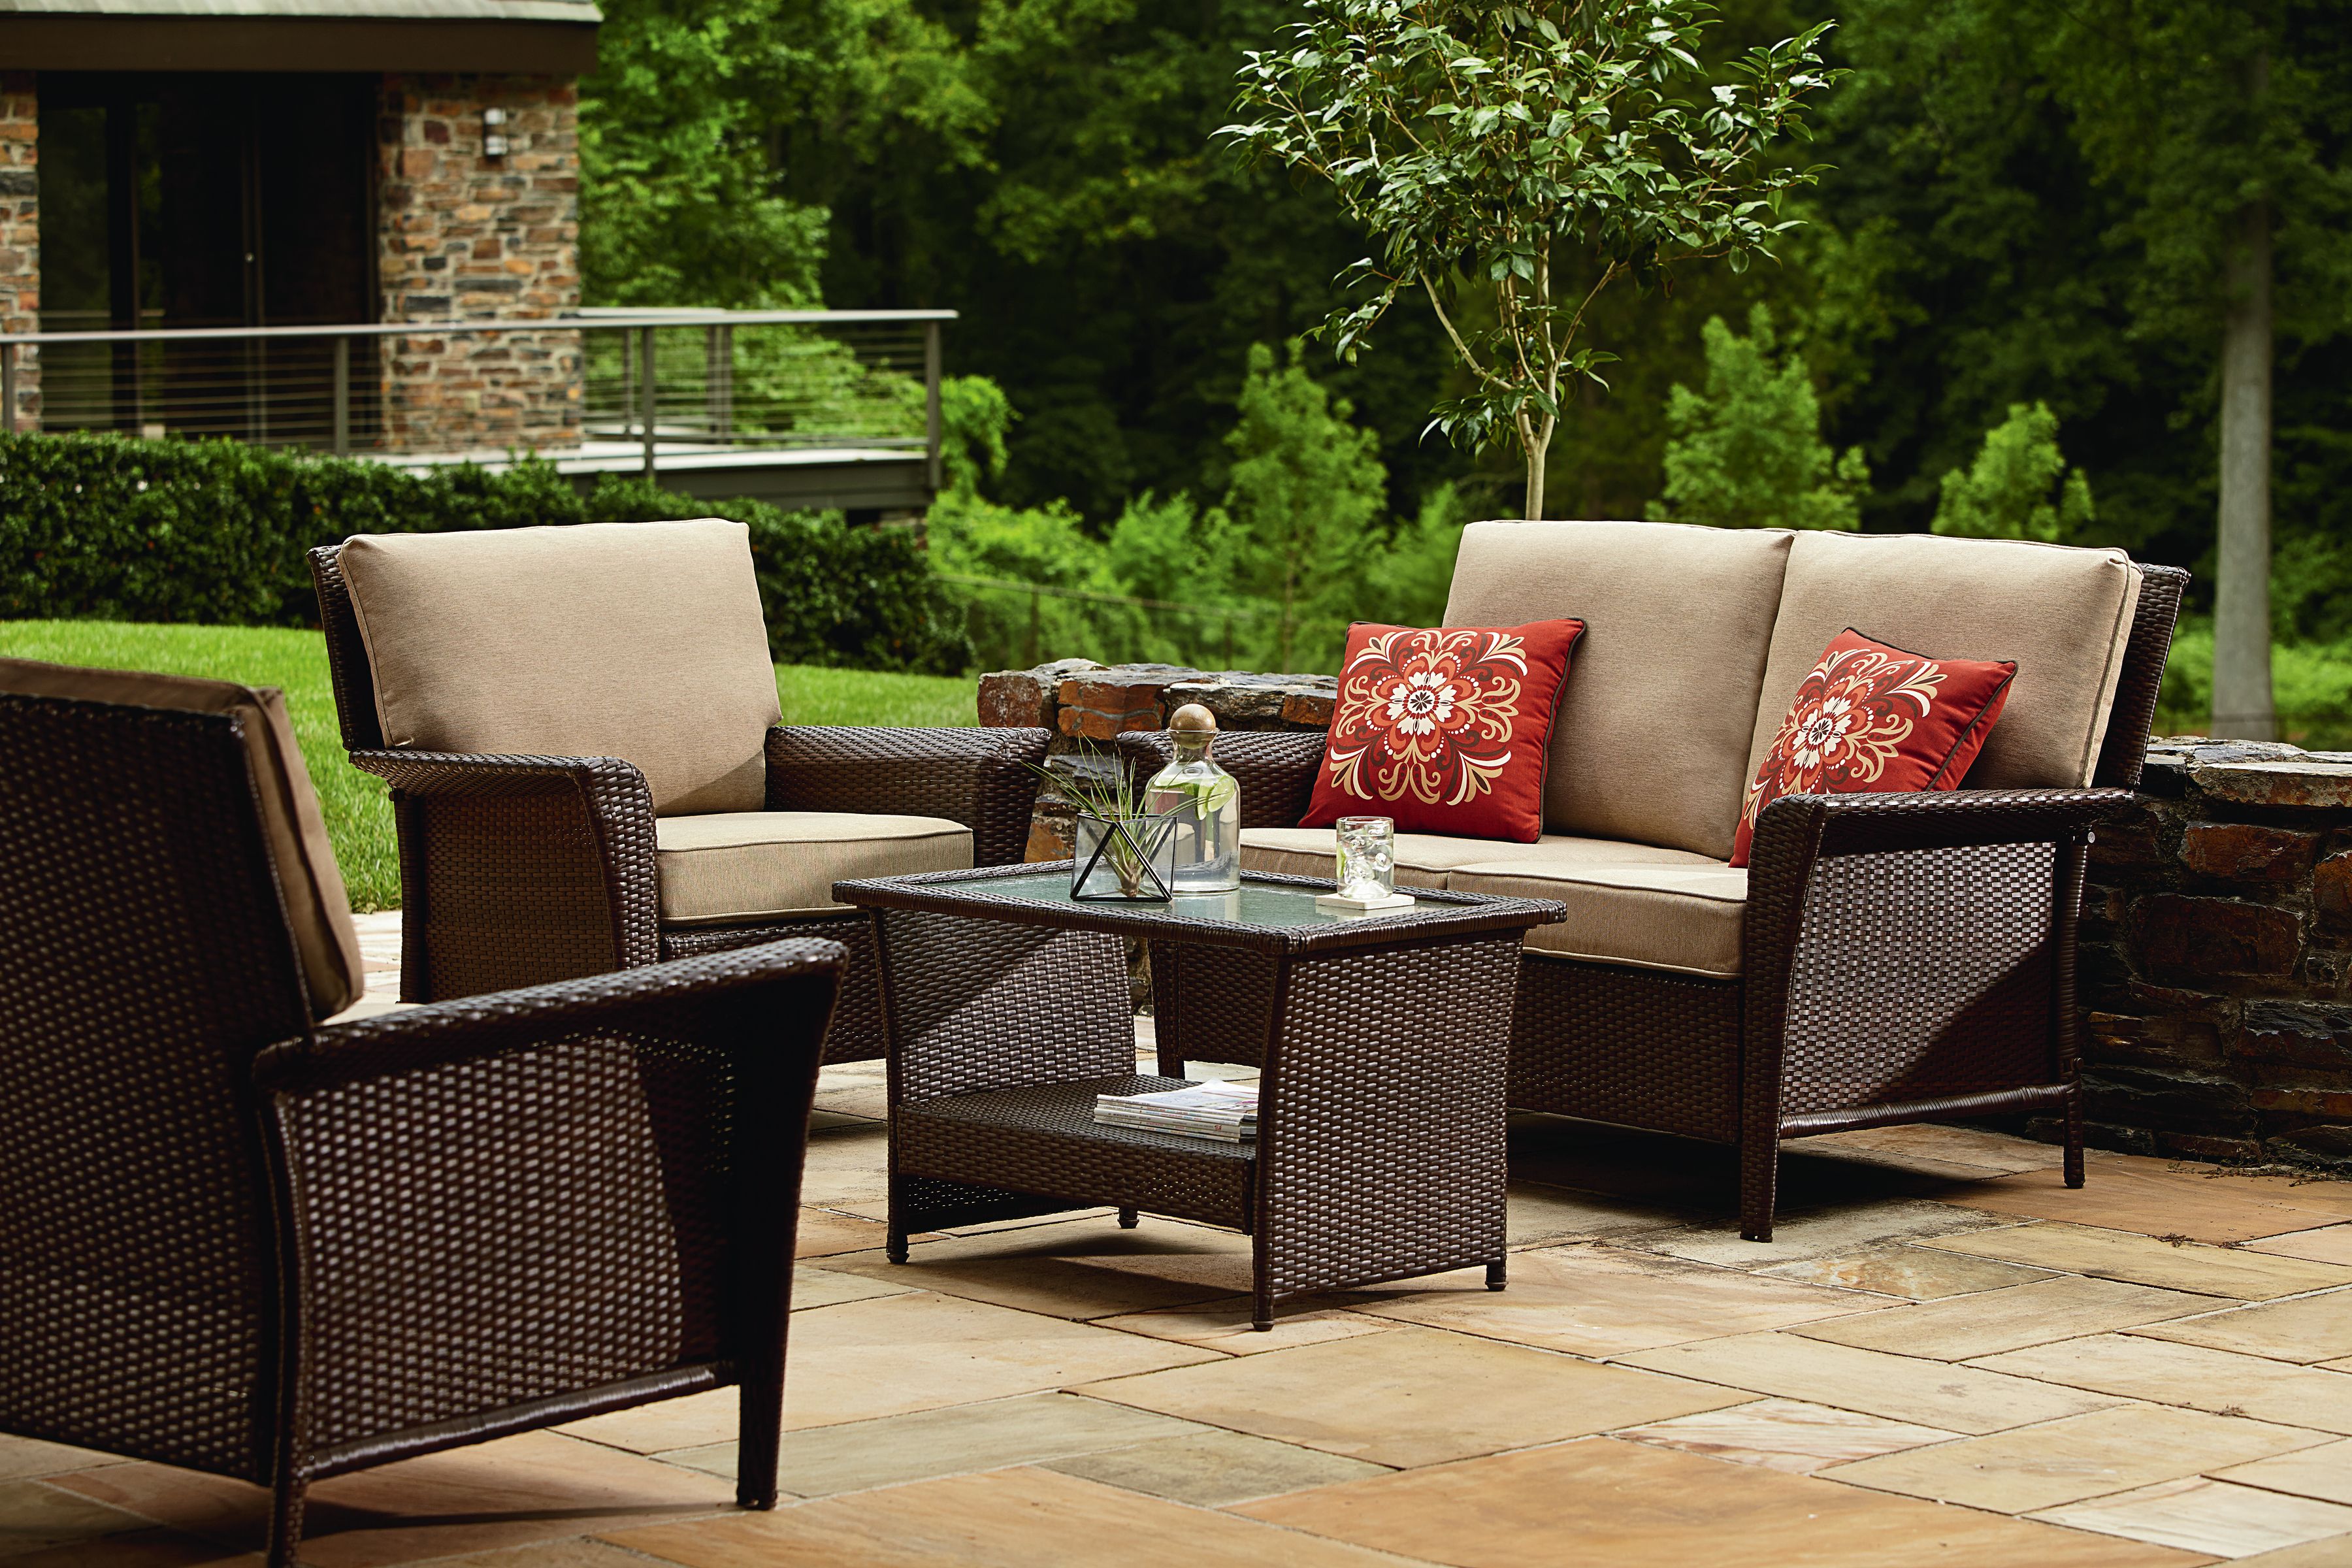 Sears Patio Chairs Solution